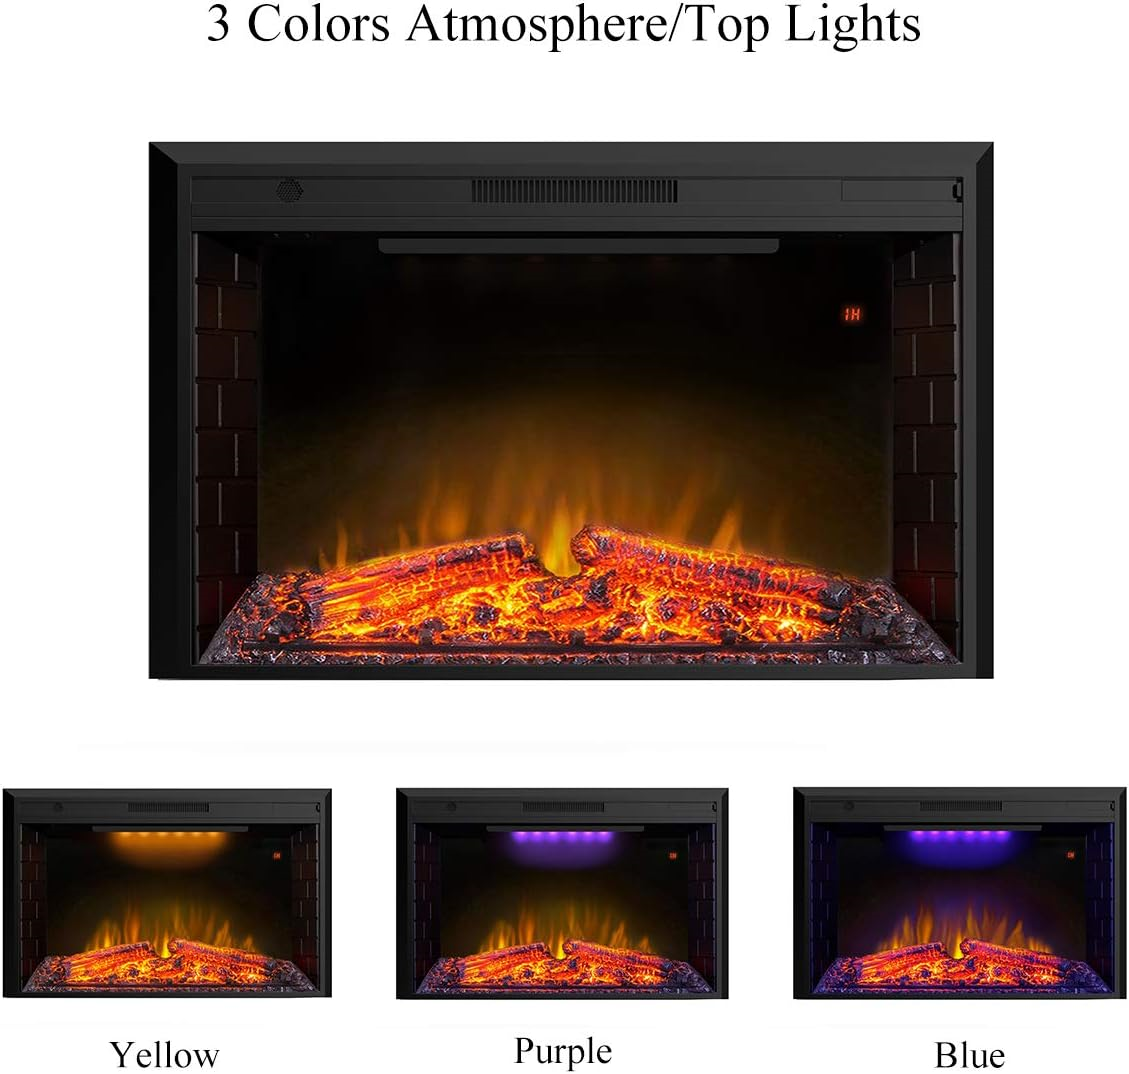 Valuxhome EF50T Electric Fireplace 50" Insert 750/1500W with Overheating Protection and Fire Crackling Sound Remote Black New